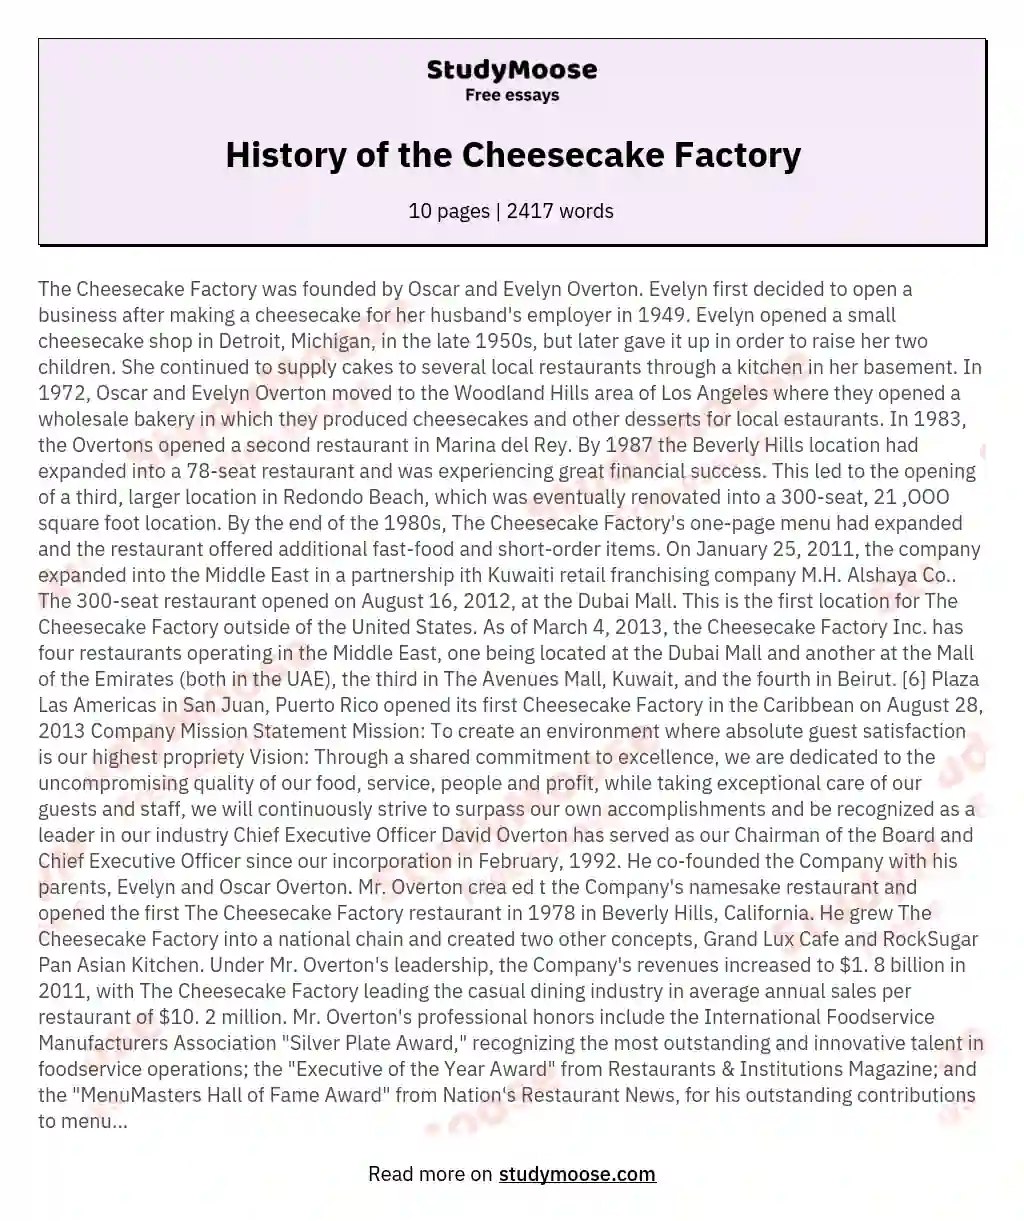 History of the Cheesecake Factory essay